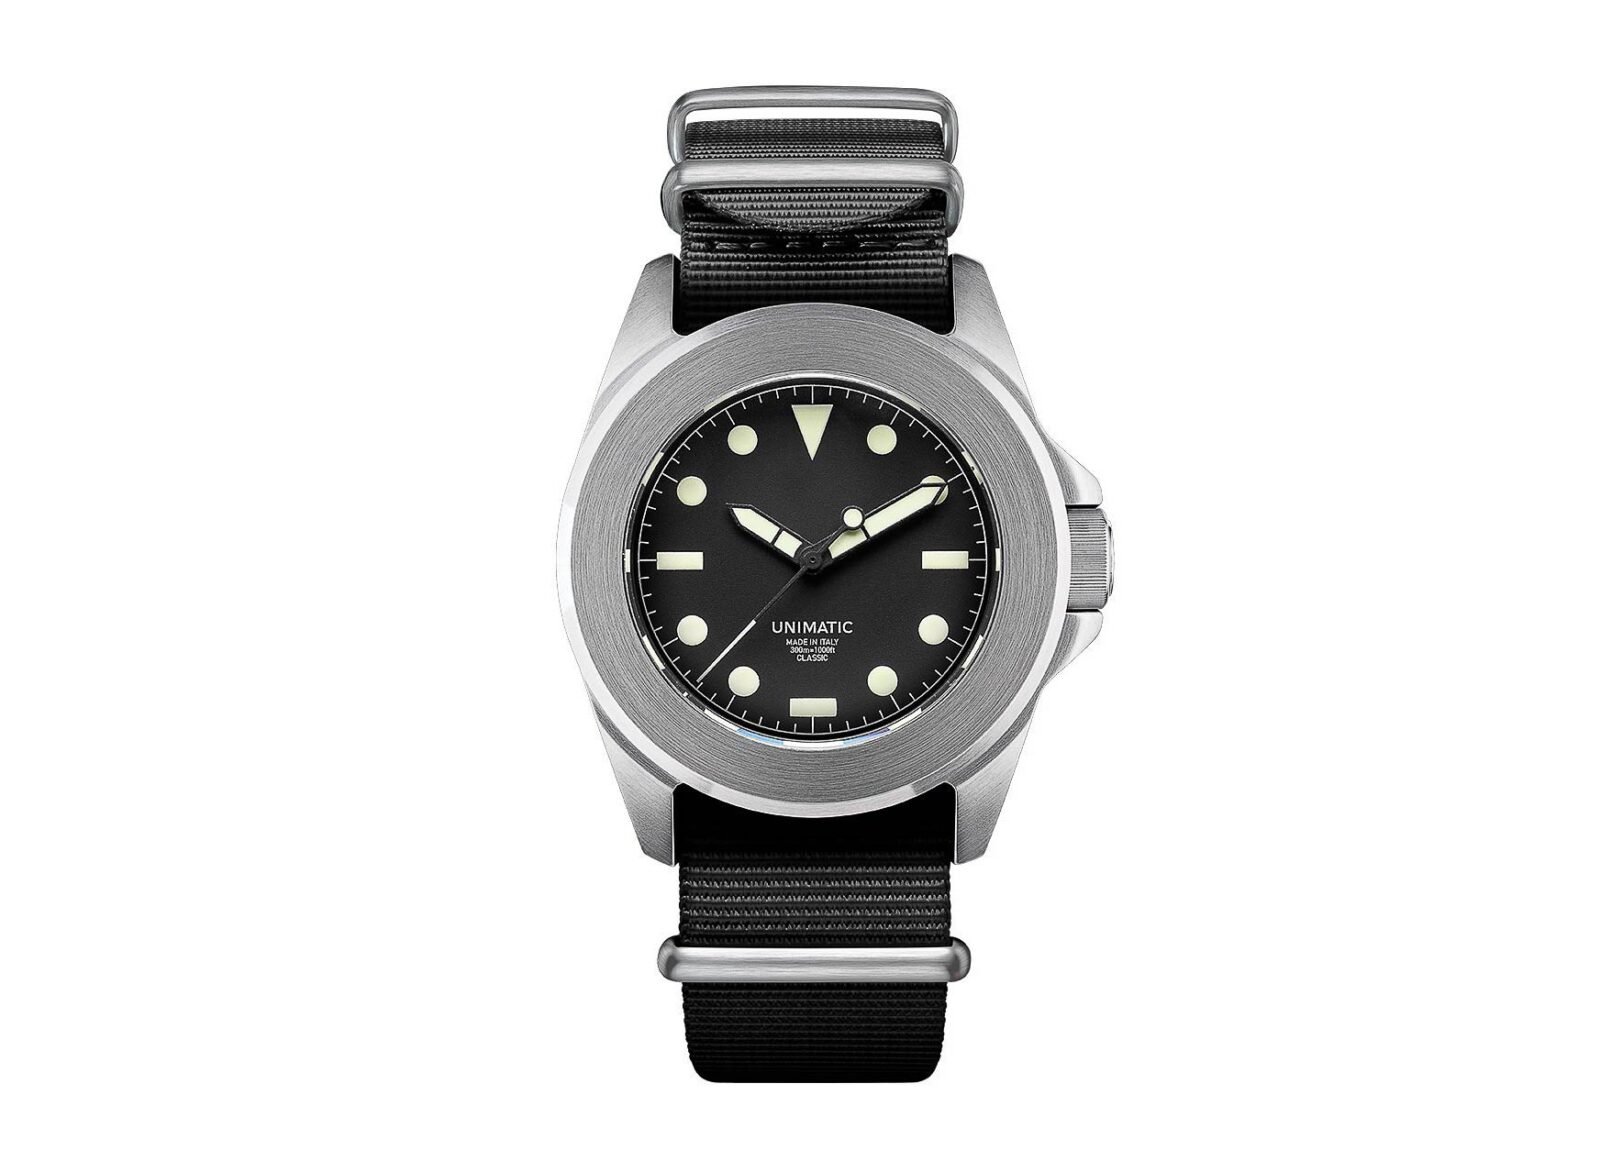 The Unimatic UC4 – A Classic Italian-Made Automatic Military Watch: $575 USD